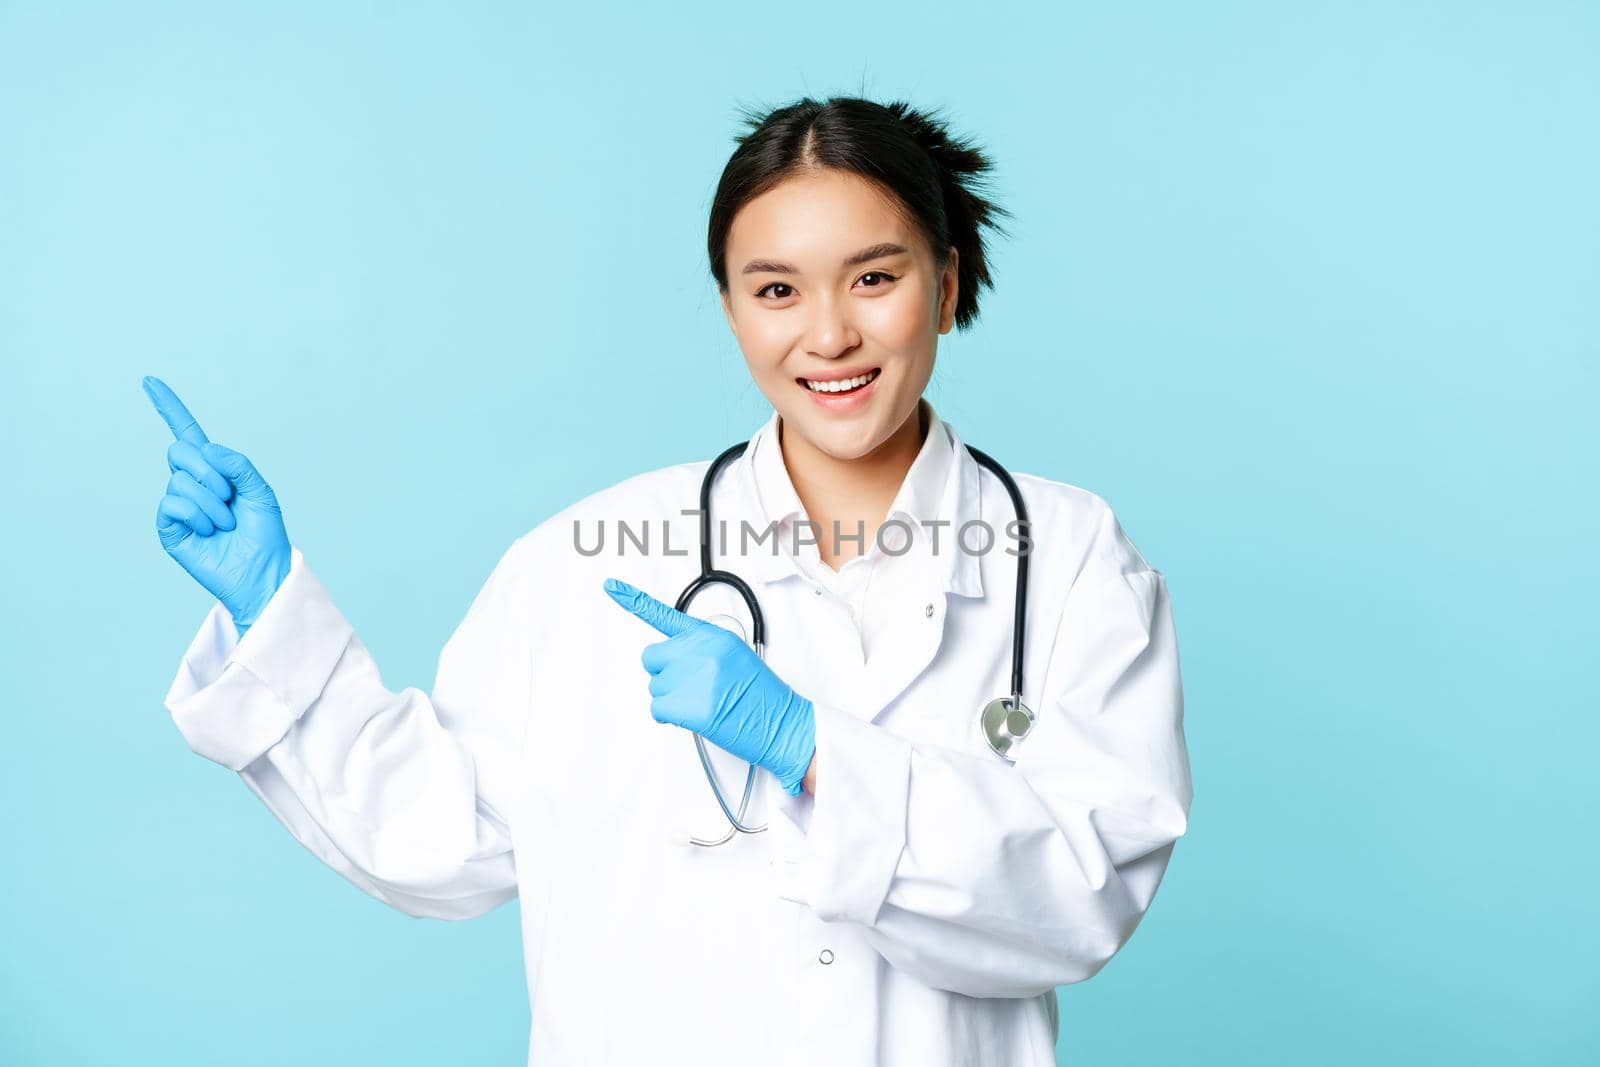 Smiling happy female doctor or nurse, pointing fingers left, wearing medical uniform and gloves, showing hospital advertisement, blue background.